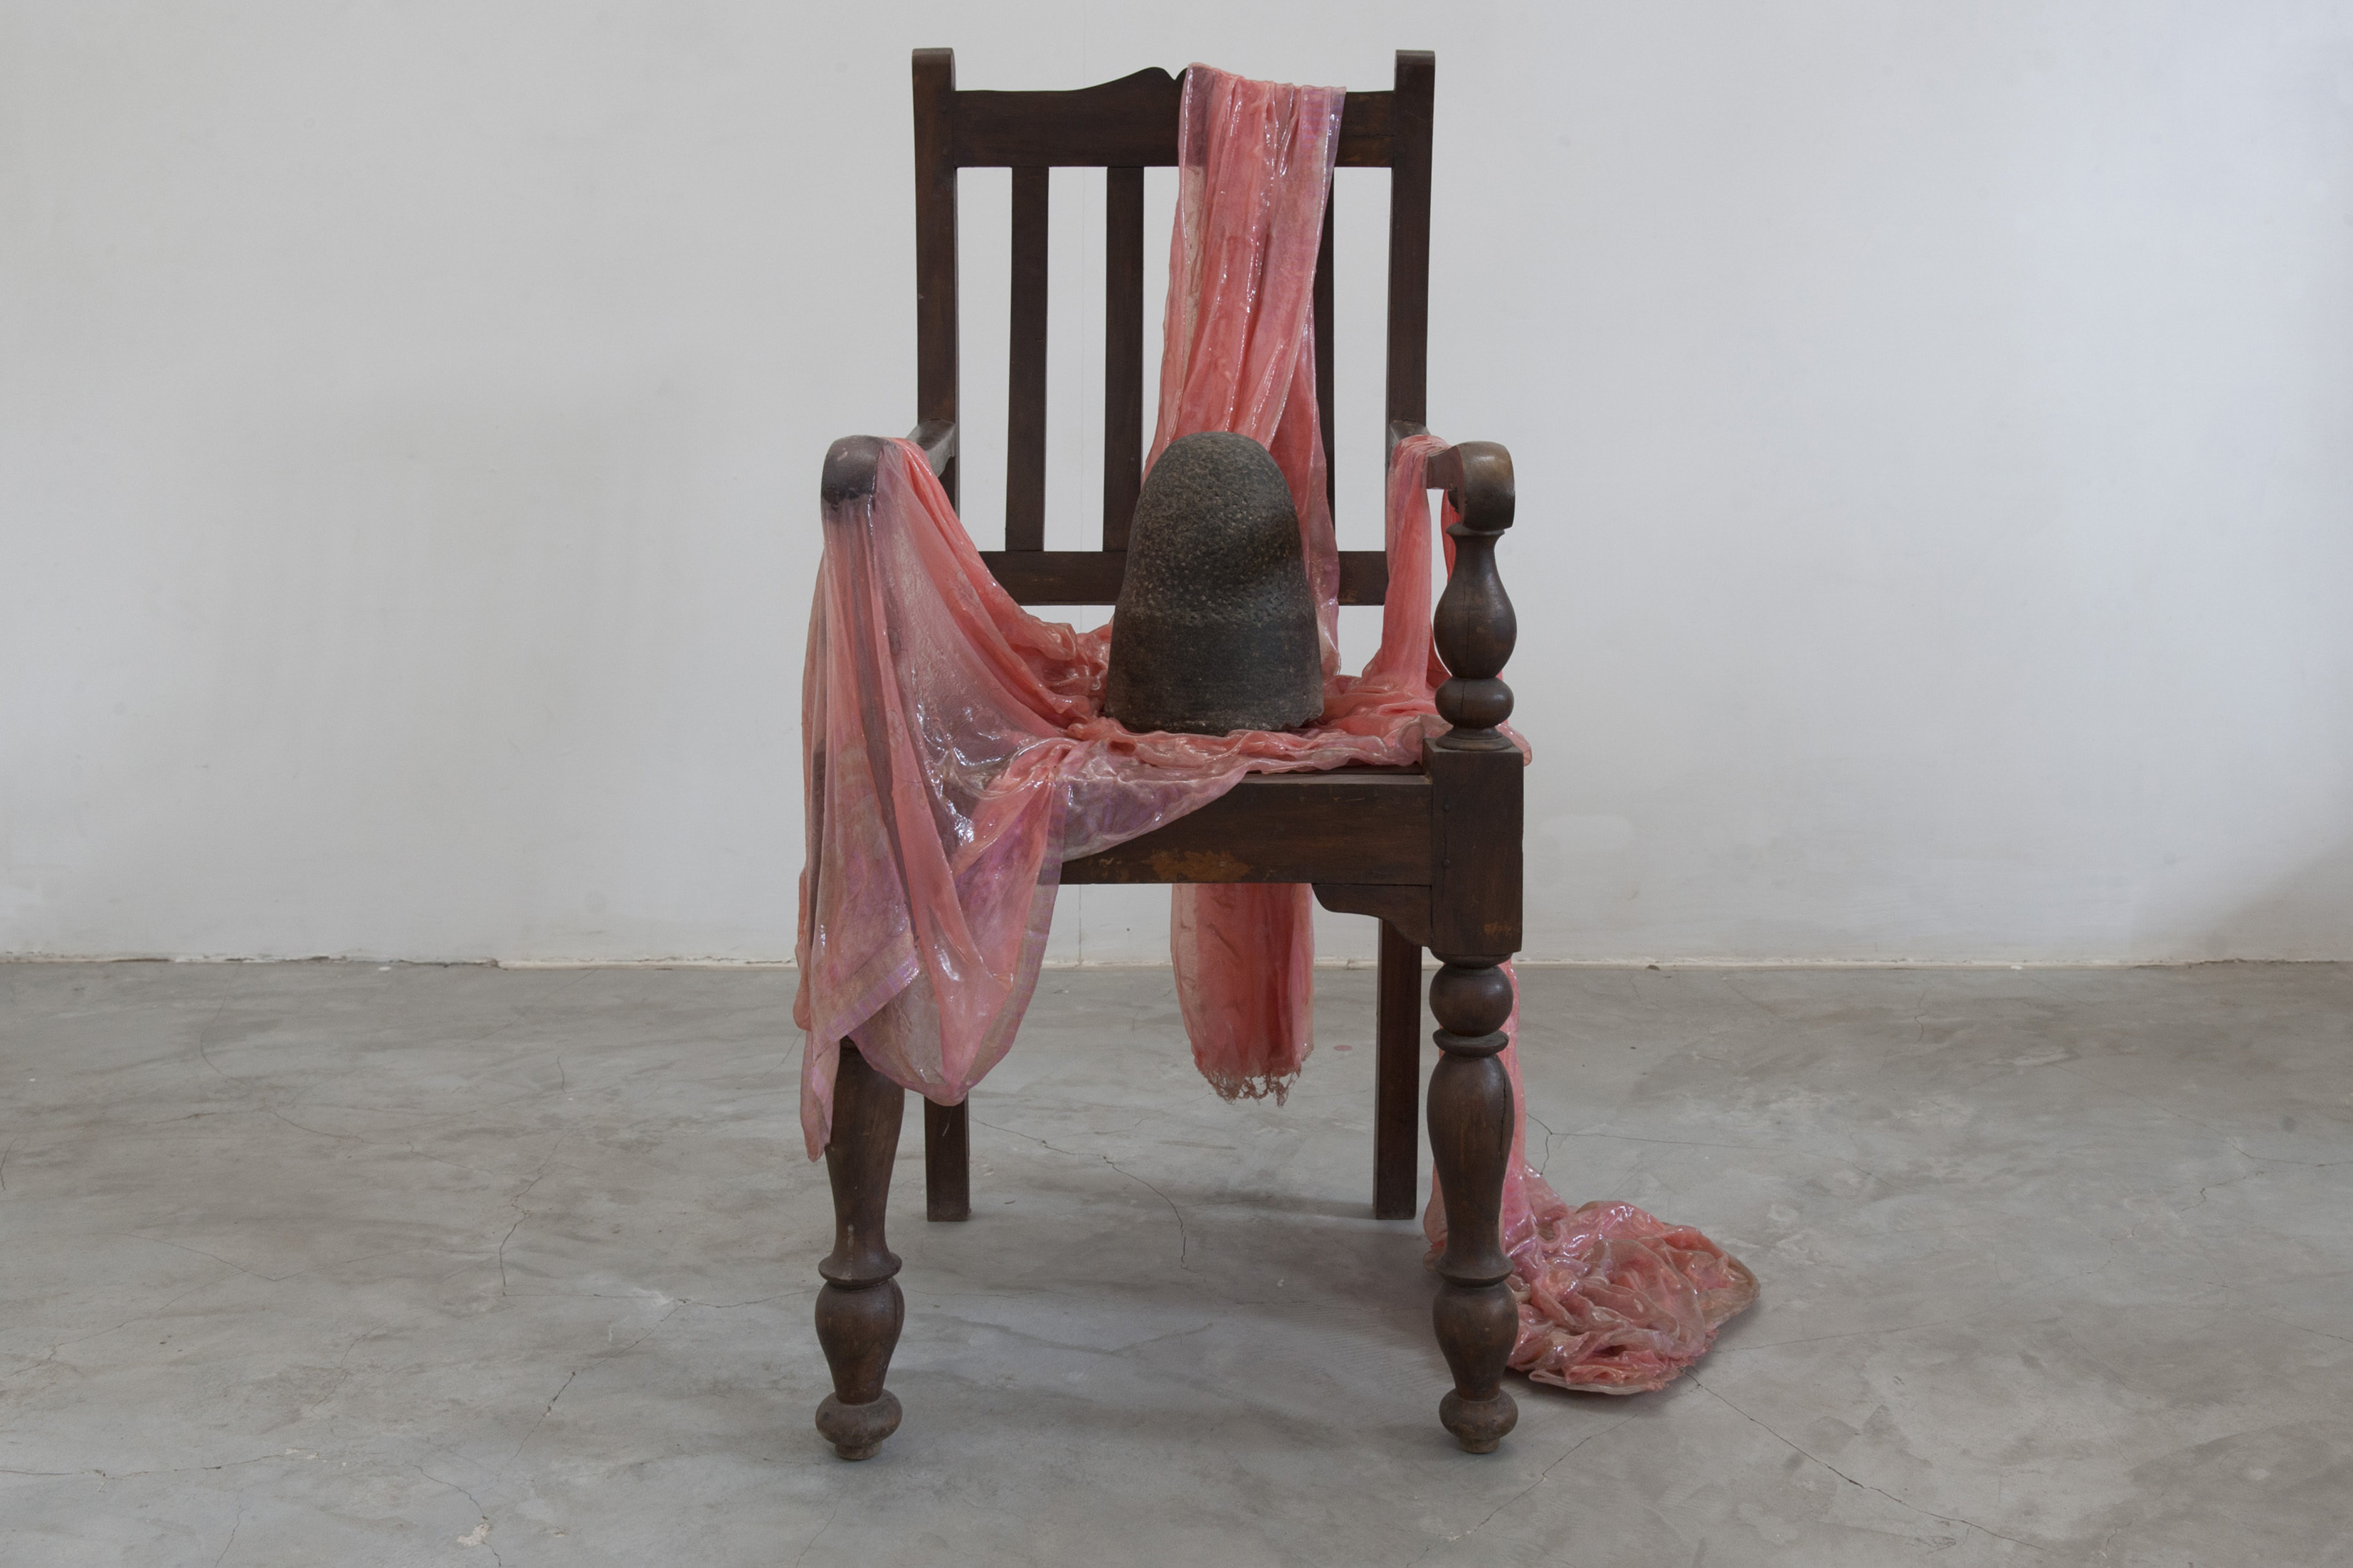 A wooden chair, covered in a sheet of shiny pink plastic